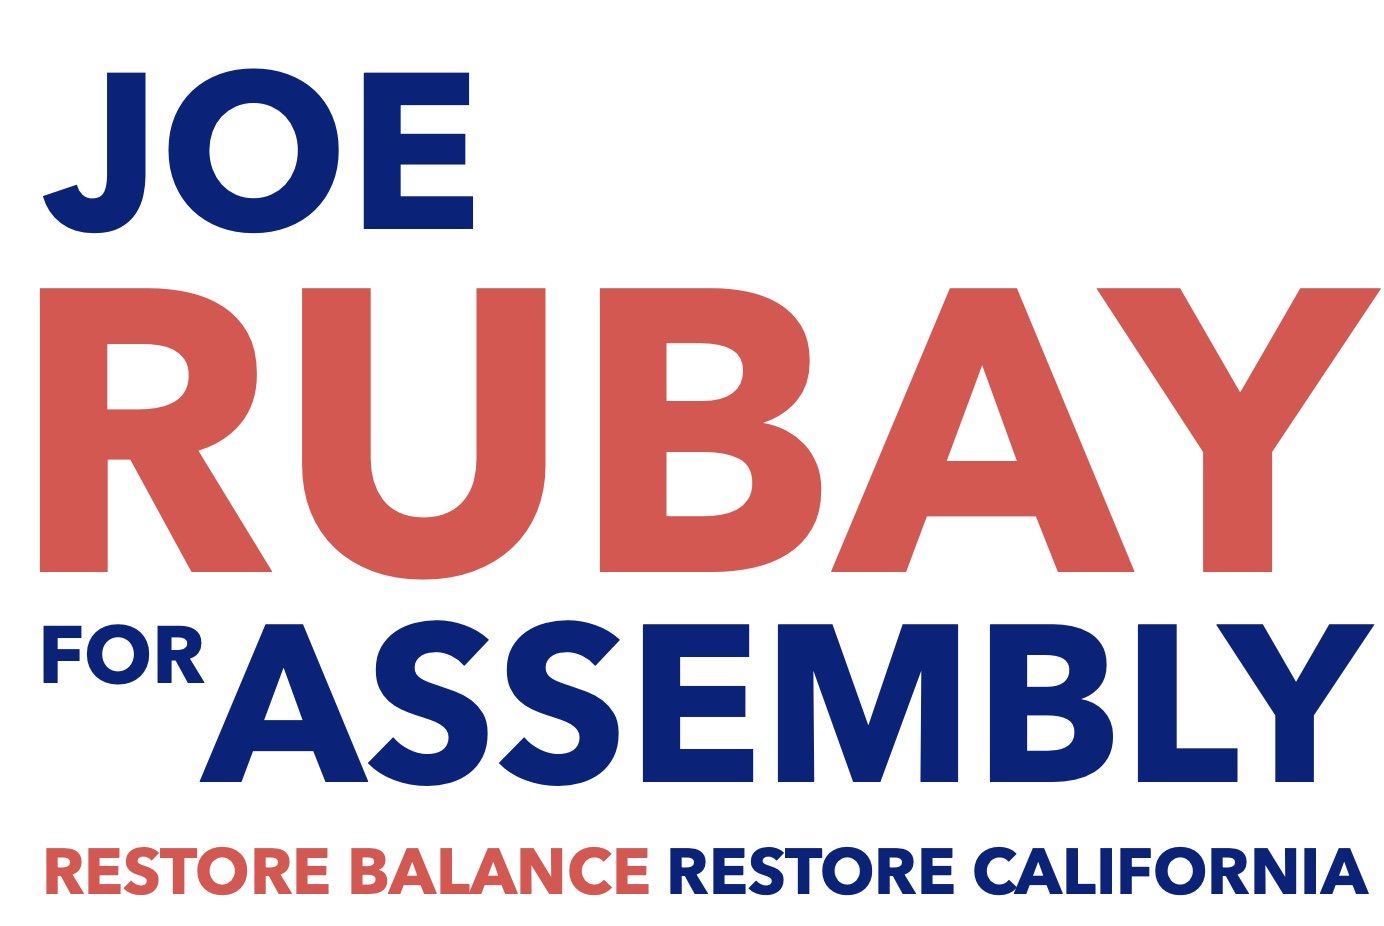 Rubay for Assembly